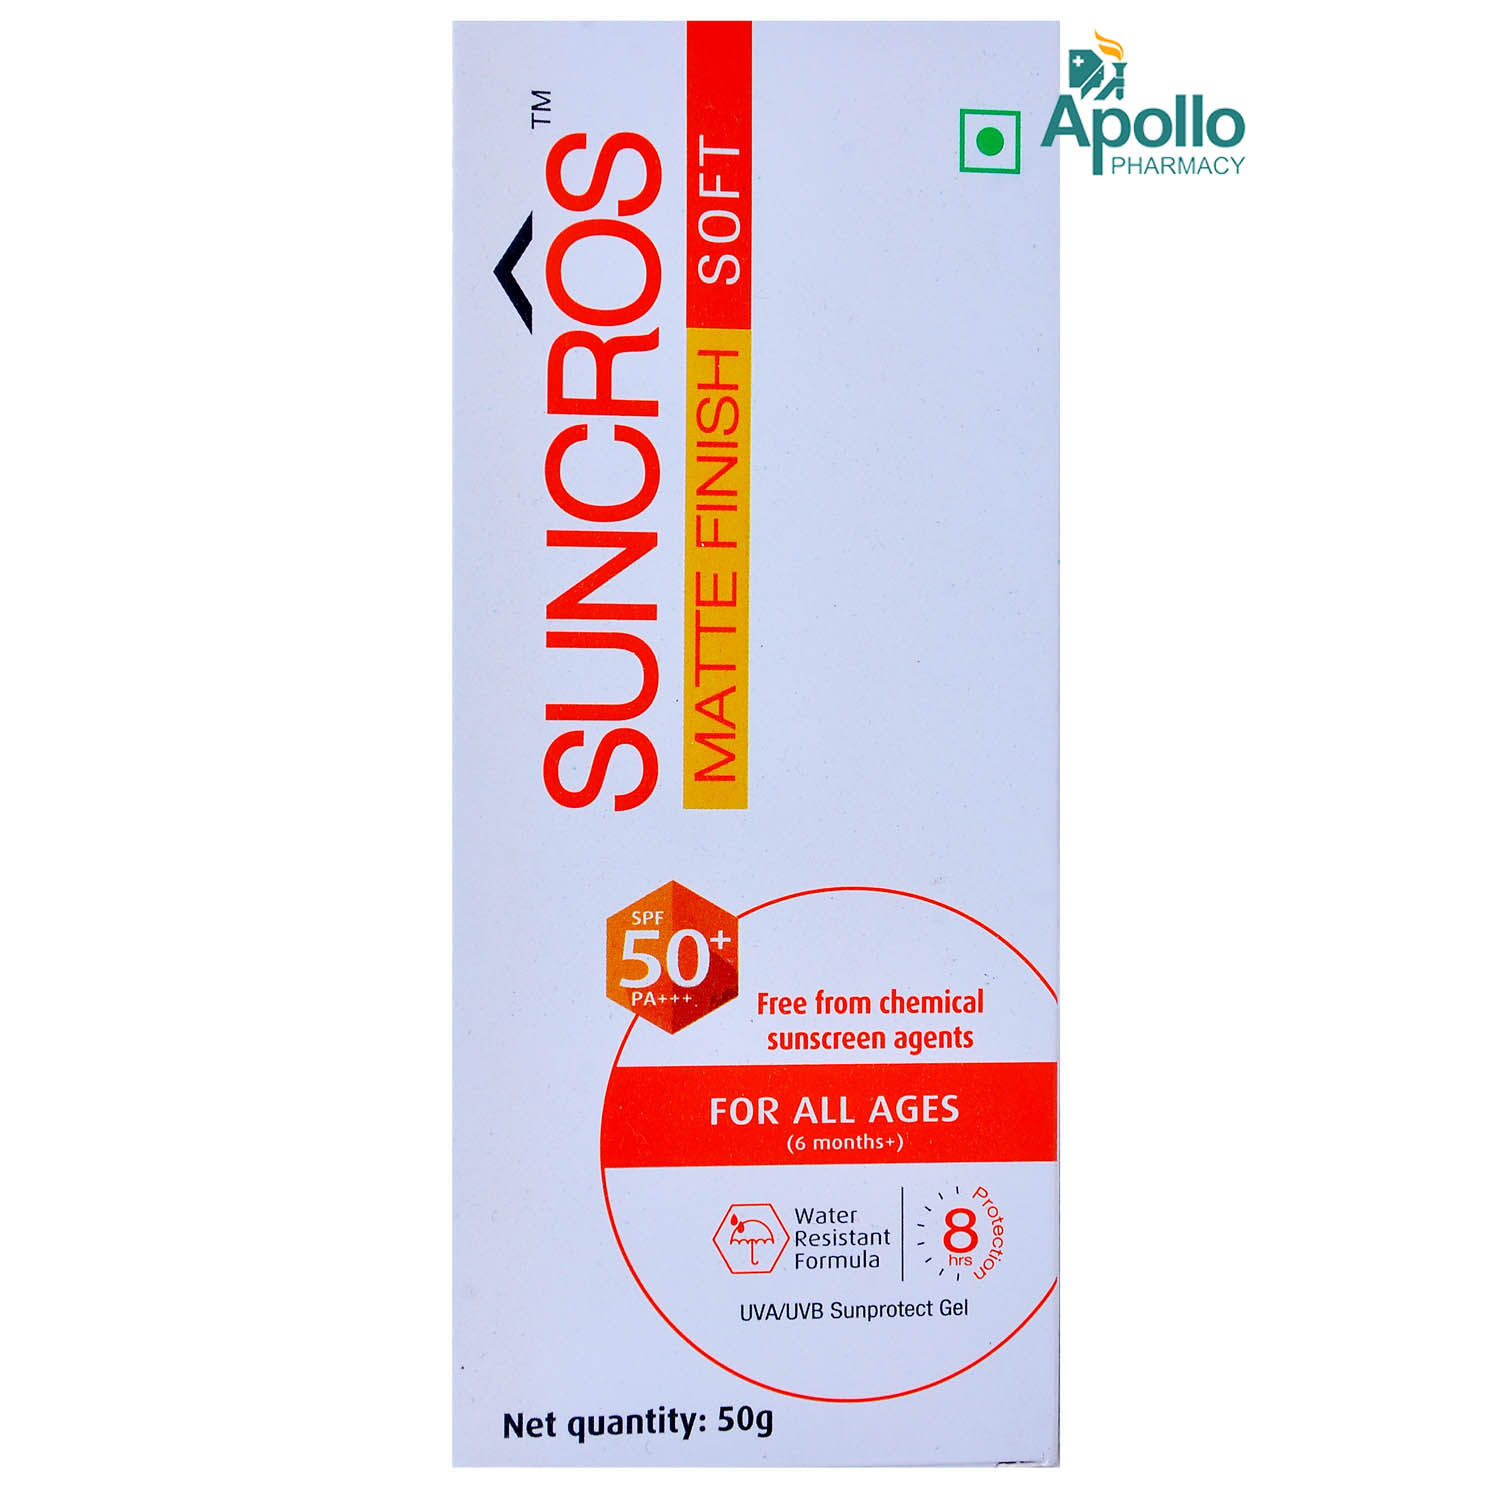 Suncros Soft Cream 50 gm Price, Uses, Side Effects, Composition 